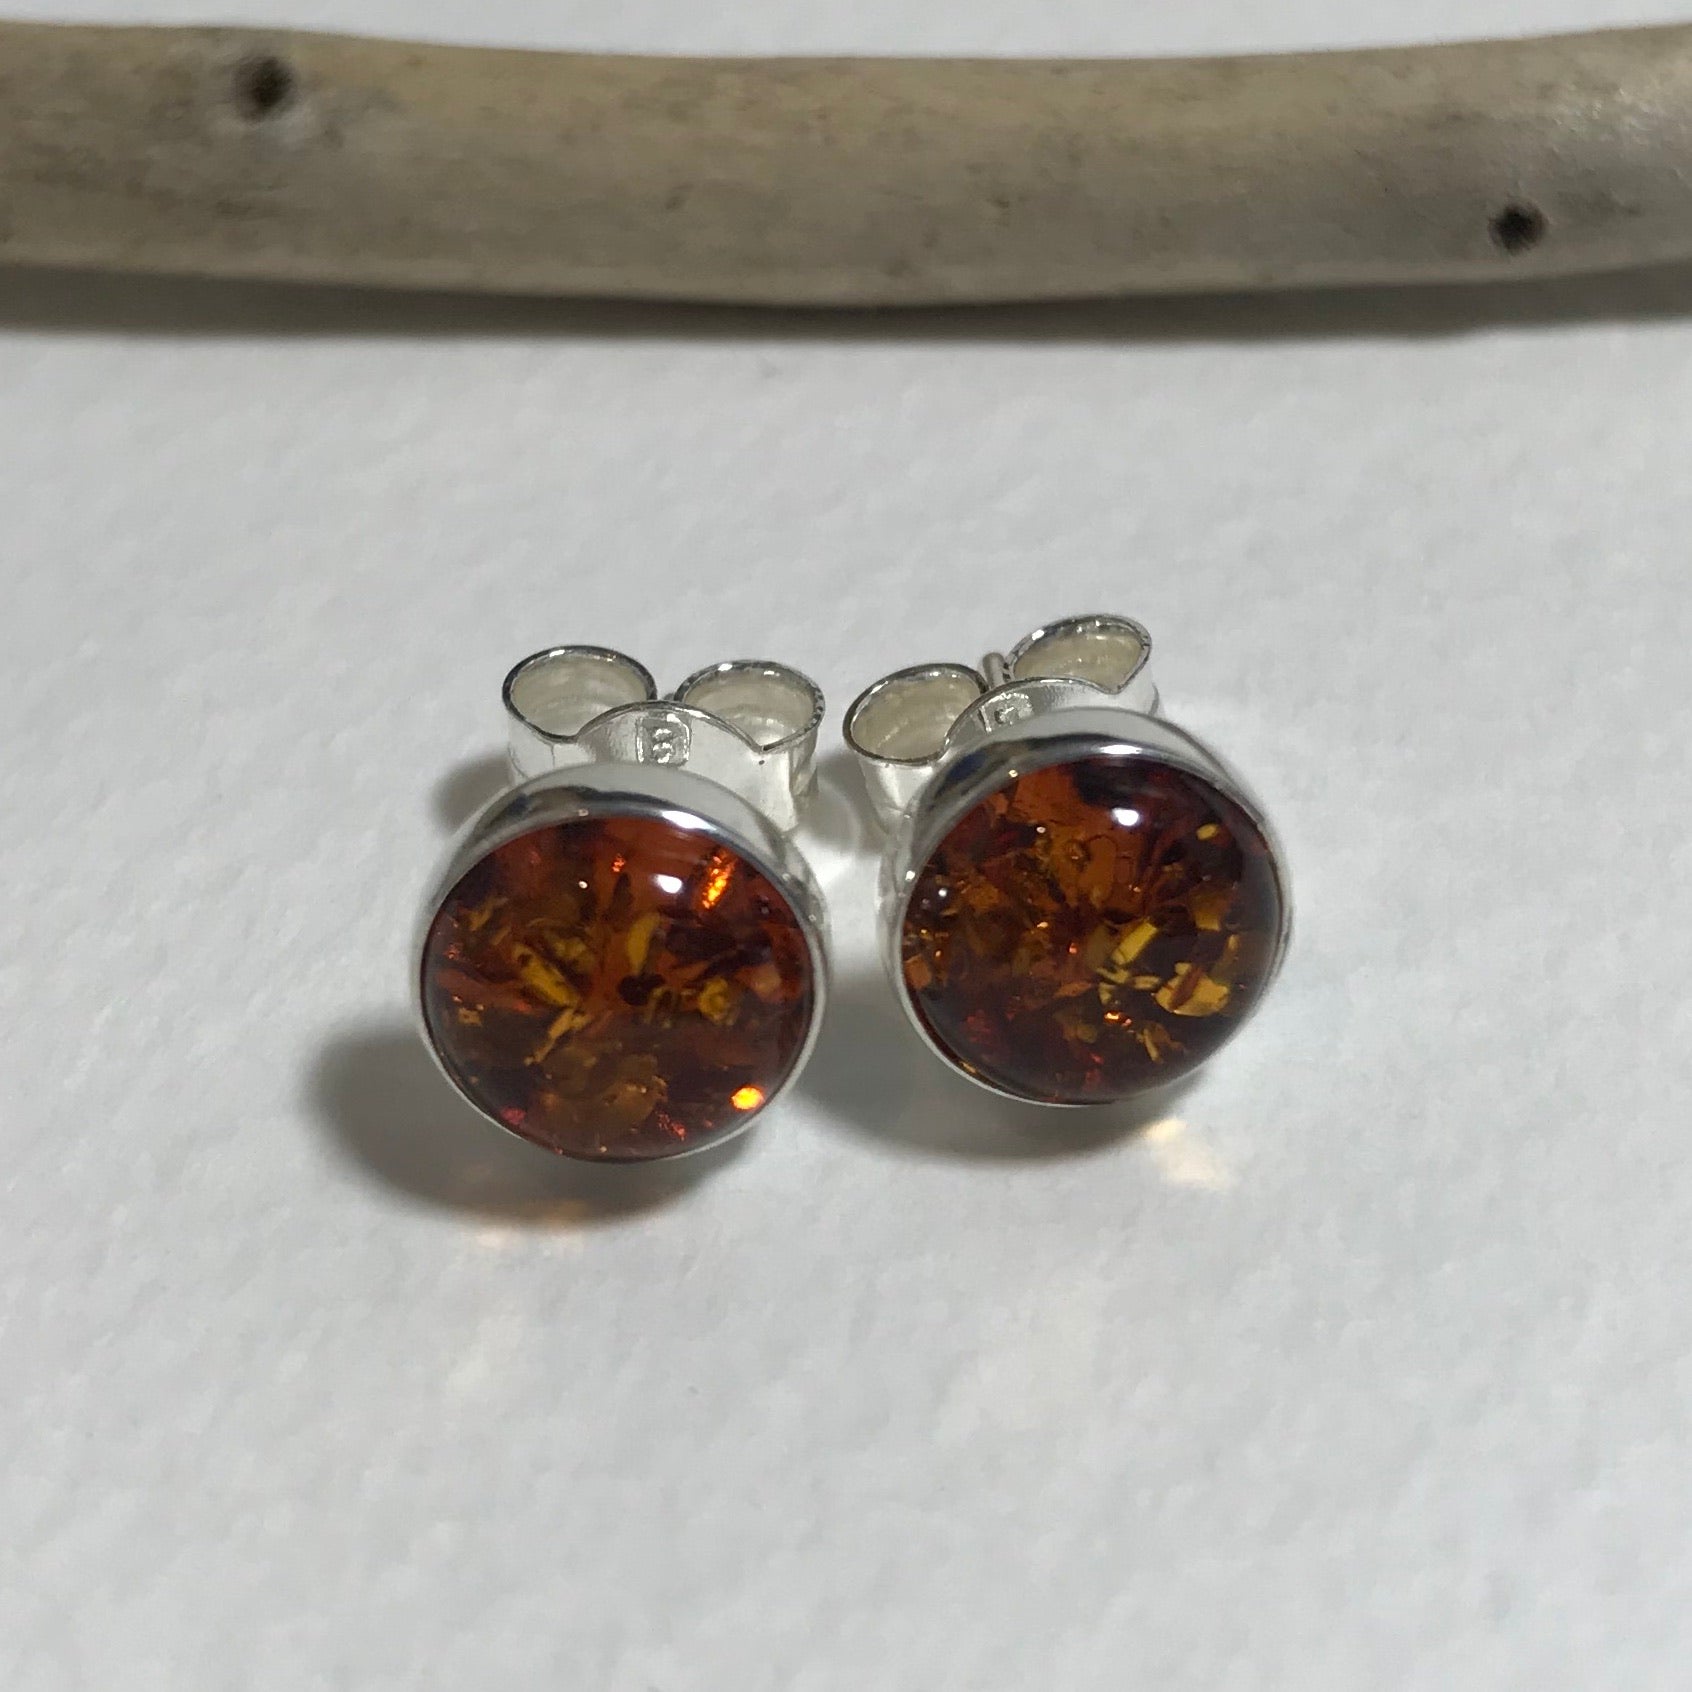 Amber Small Round Stud Earrings - The Nancy Smillie Shop - Art, Jewellery & Designer Gifts Glasgow